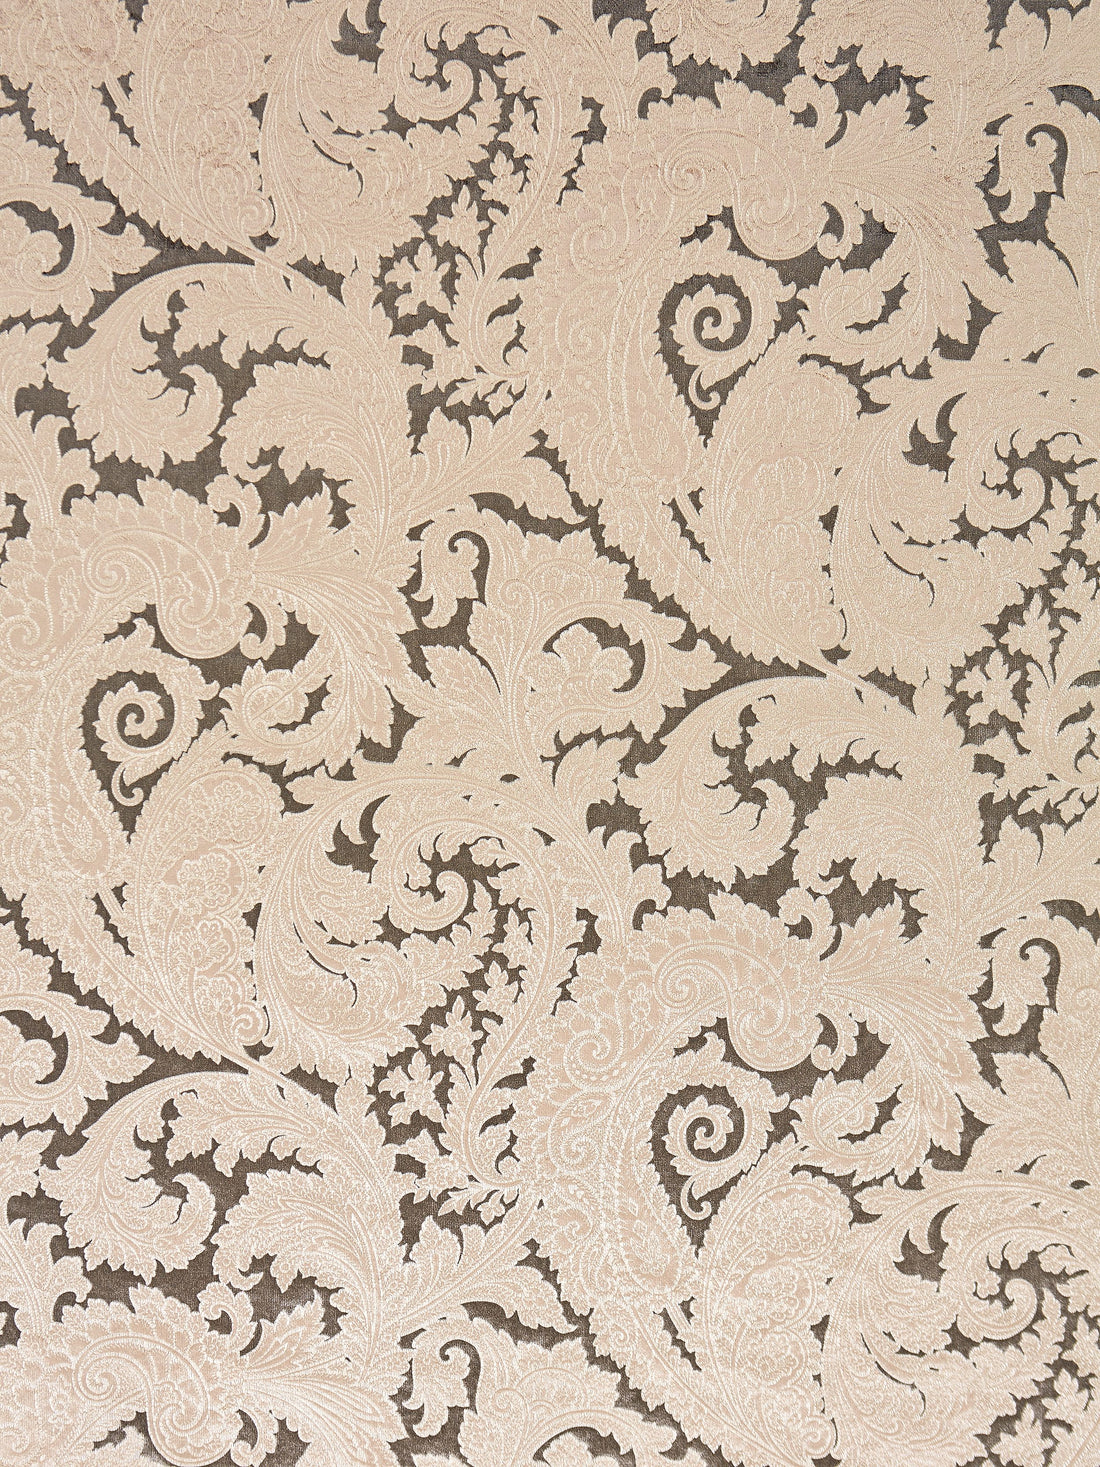 Palermo Velvet Paisley fabric in pewter color - pattern number SC 000416565 - by Scalamandre in the Scalamandre Fabrics Book 1 collection